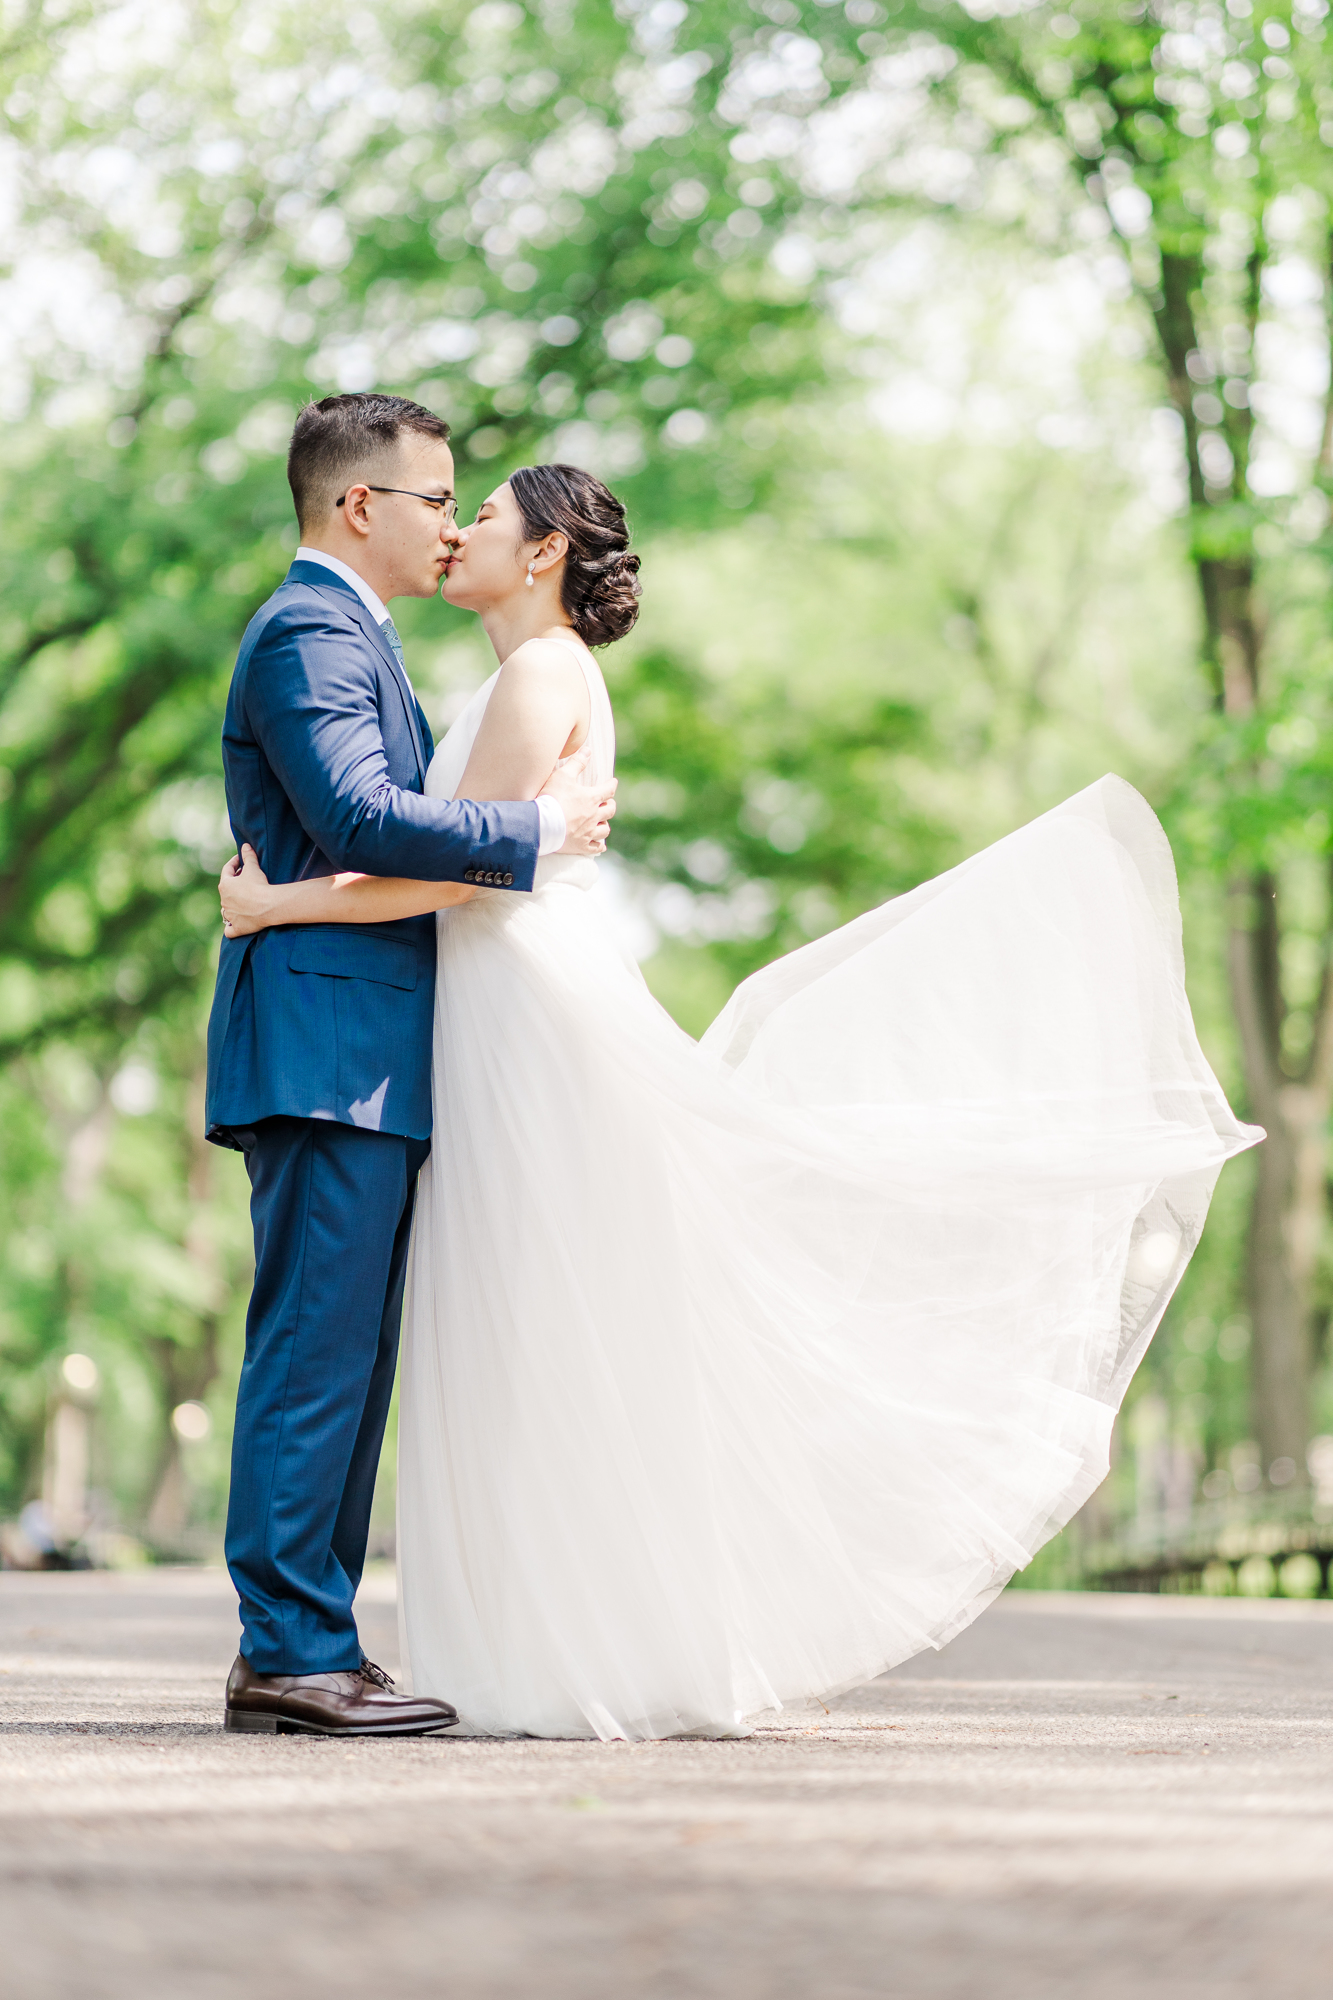 Fun Photos of New York Elopement in DUMBO and Central Park